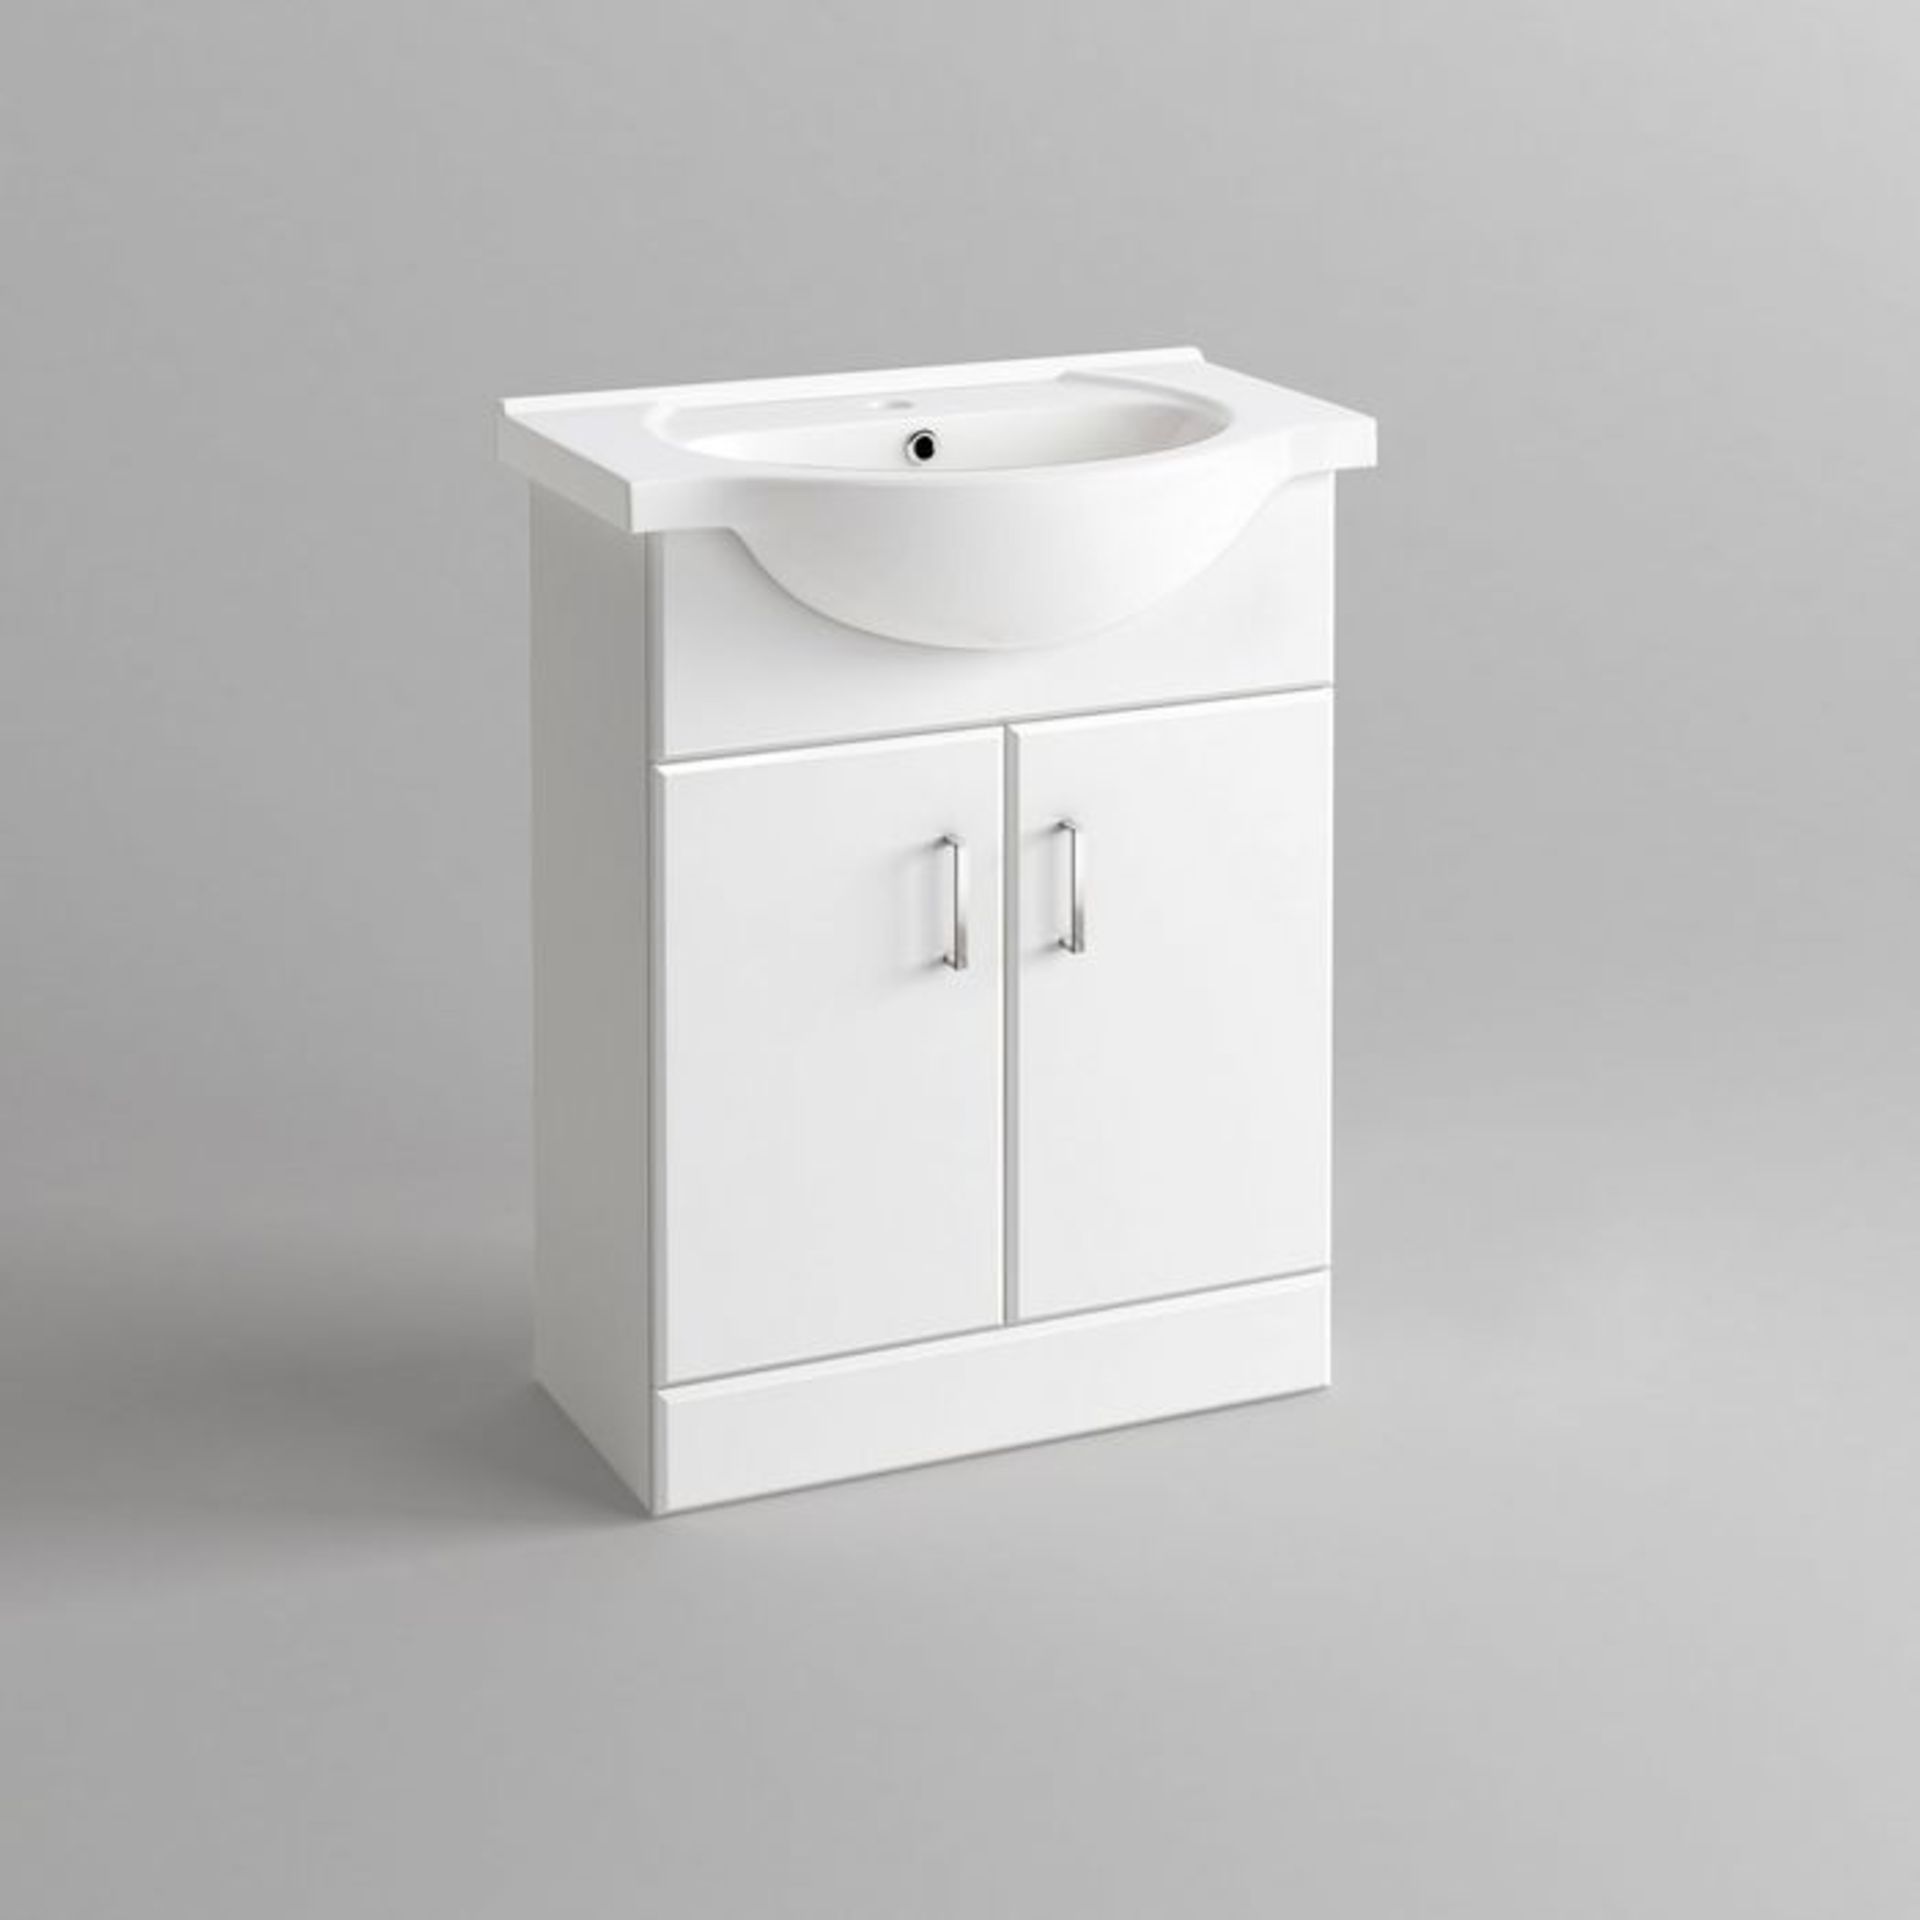 (TA201) 550x300mm Quartz Gloss White Built In Basin Cabinet. RRP £349.99. Comes complete with basin. - Image 4 of 5